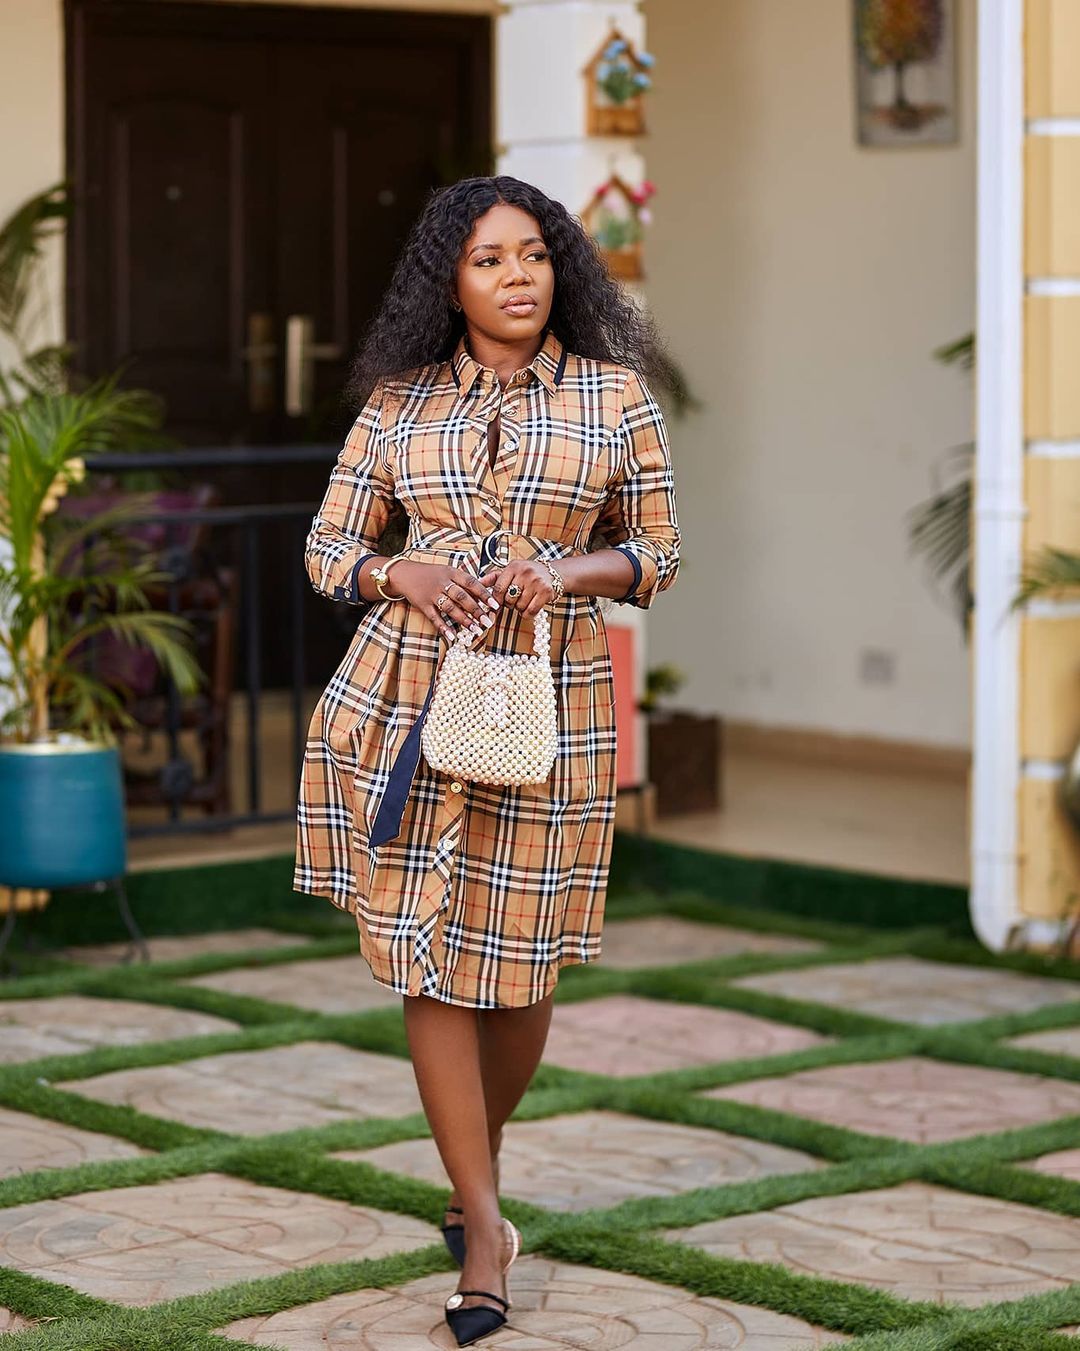 What To Wear To An Office: Ghanaian Celebrities Inspired